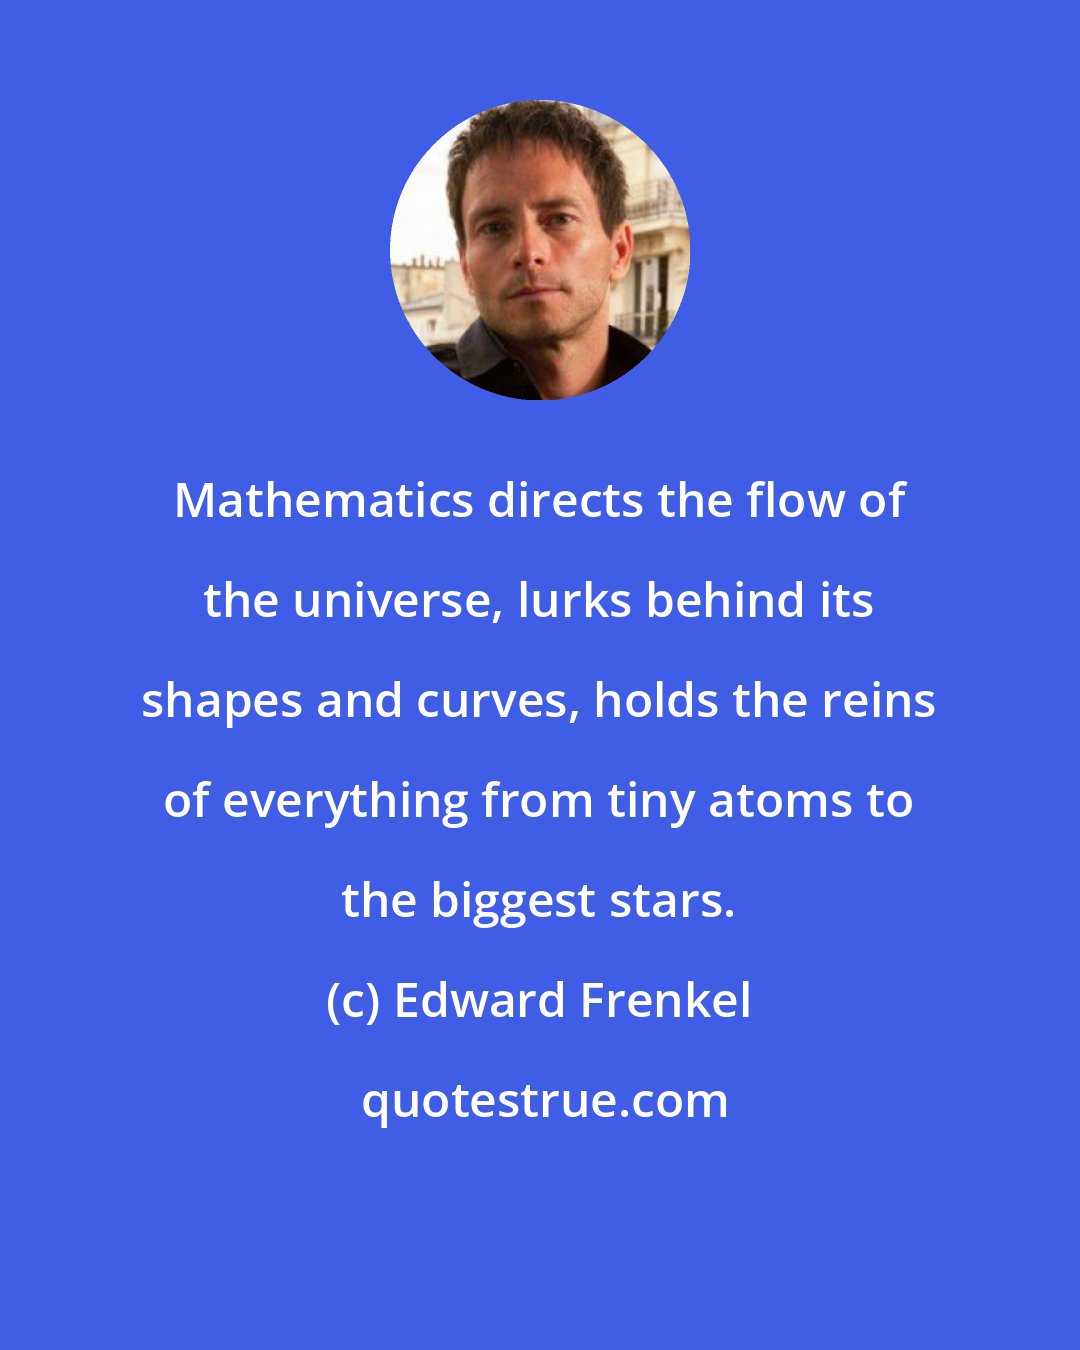 Edward Frenkel: Mathematics directs the flow of the universe, lurks behind its shapes and curves, holds the reins of everything from tiny atoms to the biggest stars.